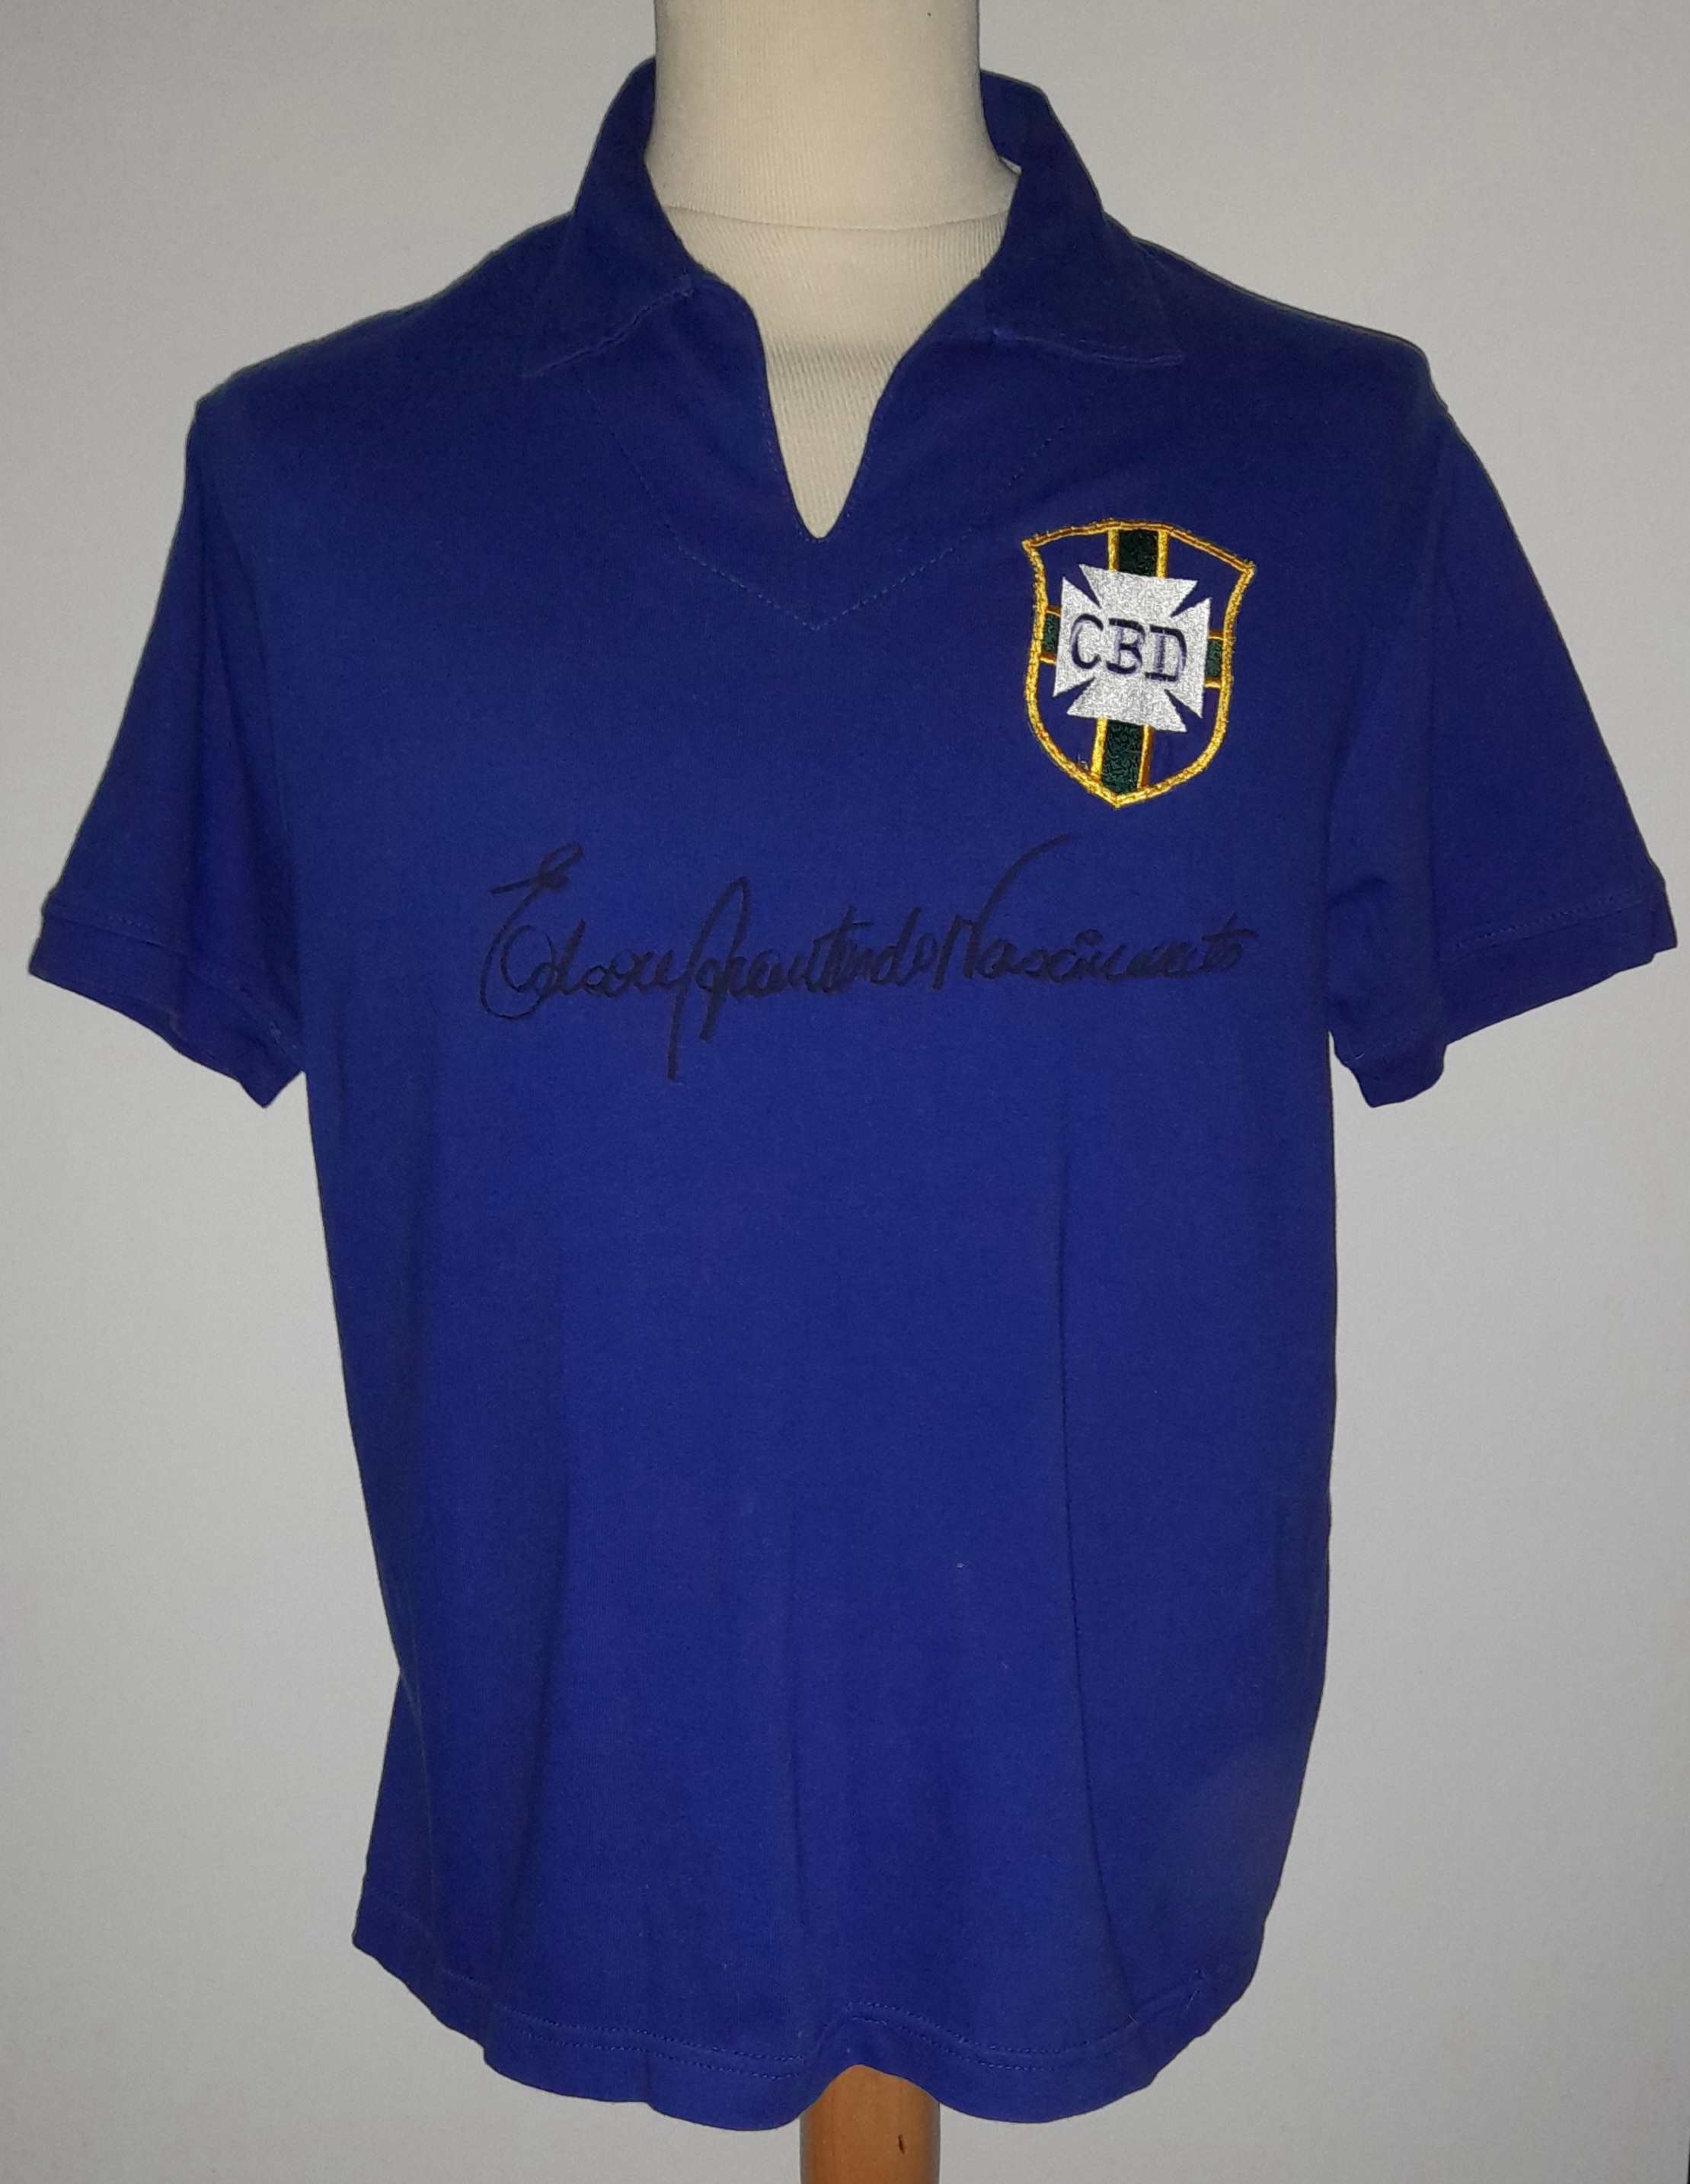 BRAZIL 1962 WORLD CUP SHIRT AUTOGRAPHED BY PELE